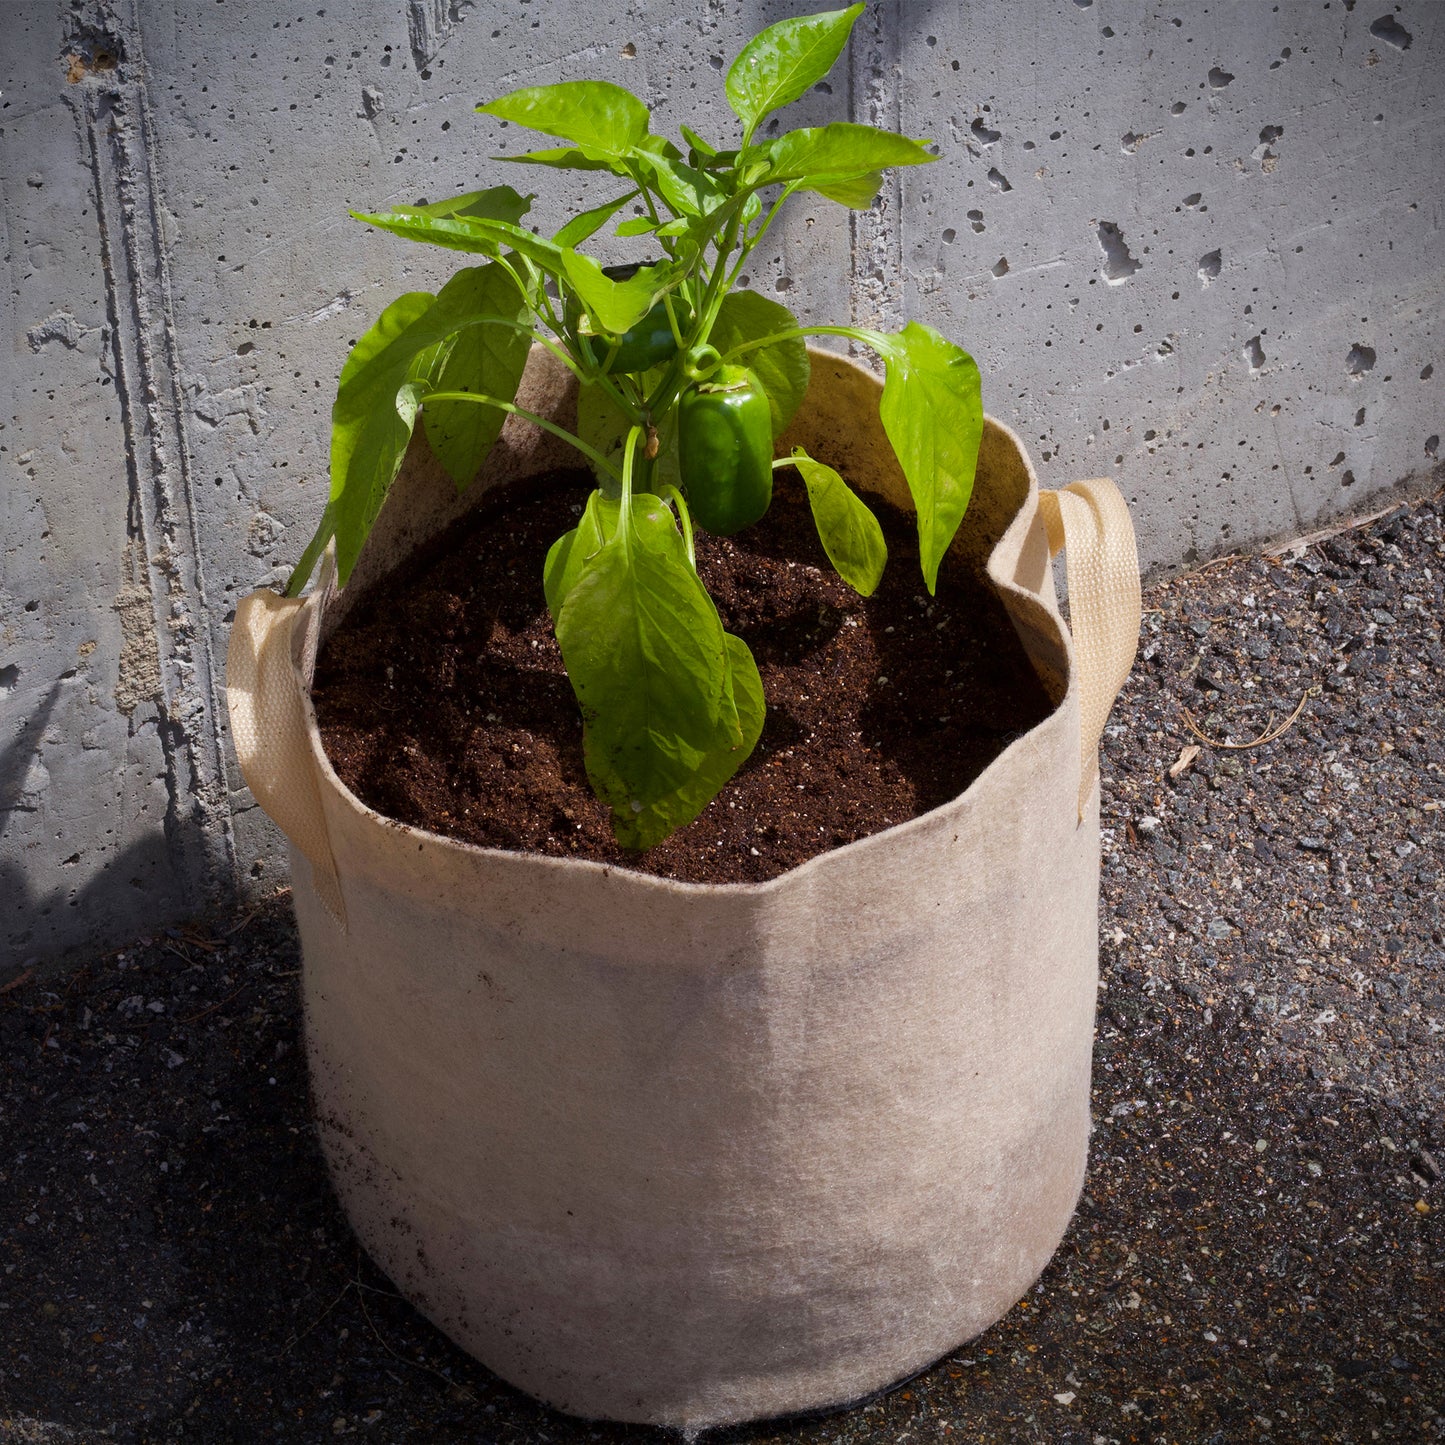 Pepper plant growing healthily and happily in the Ferry-Morse Flexi-Pot, flexible fabric planter with handles.